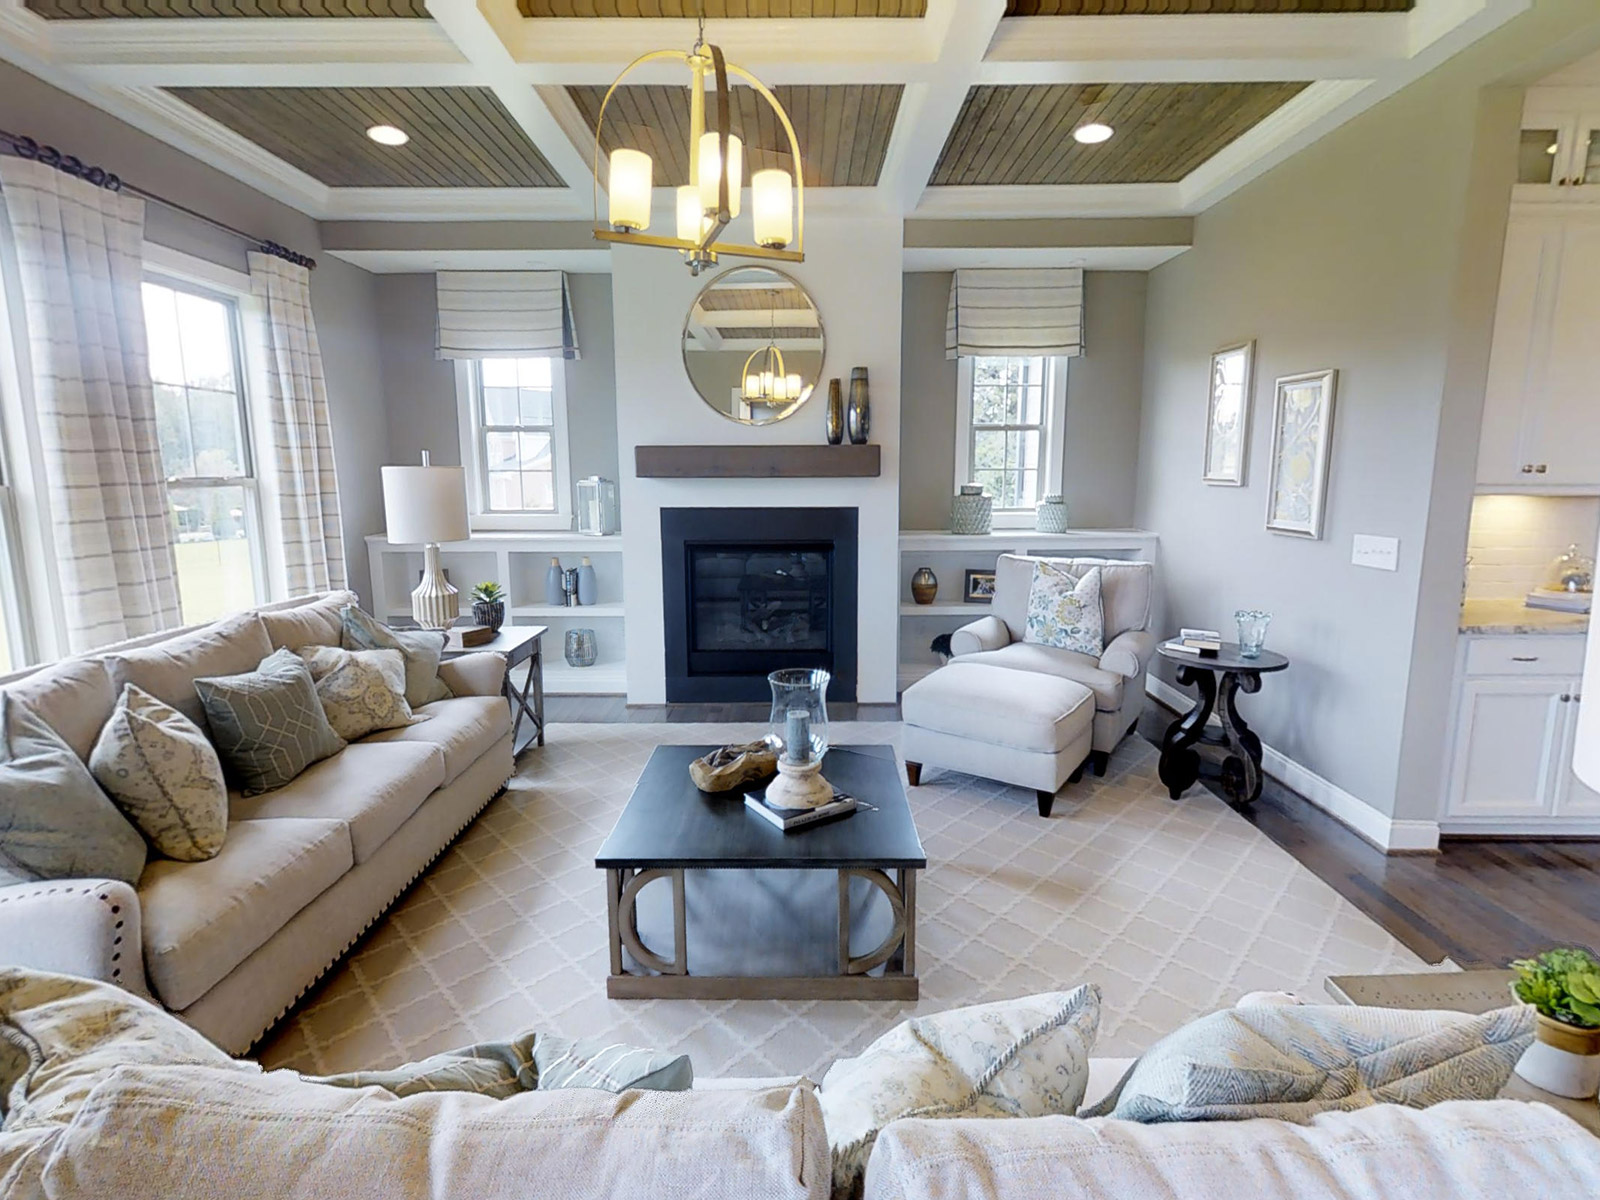 Family room with built-in bookshelves and coffered wood ceiling in the Crawford plan at Banks Pointe.